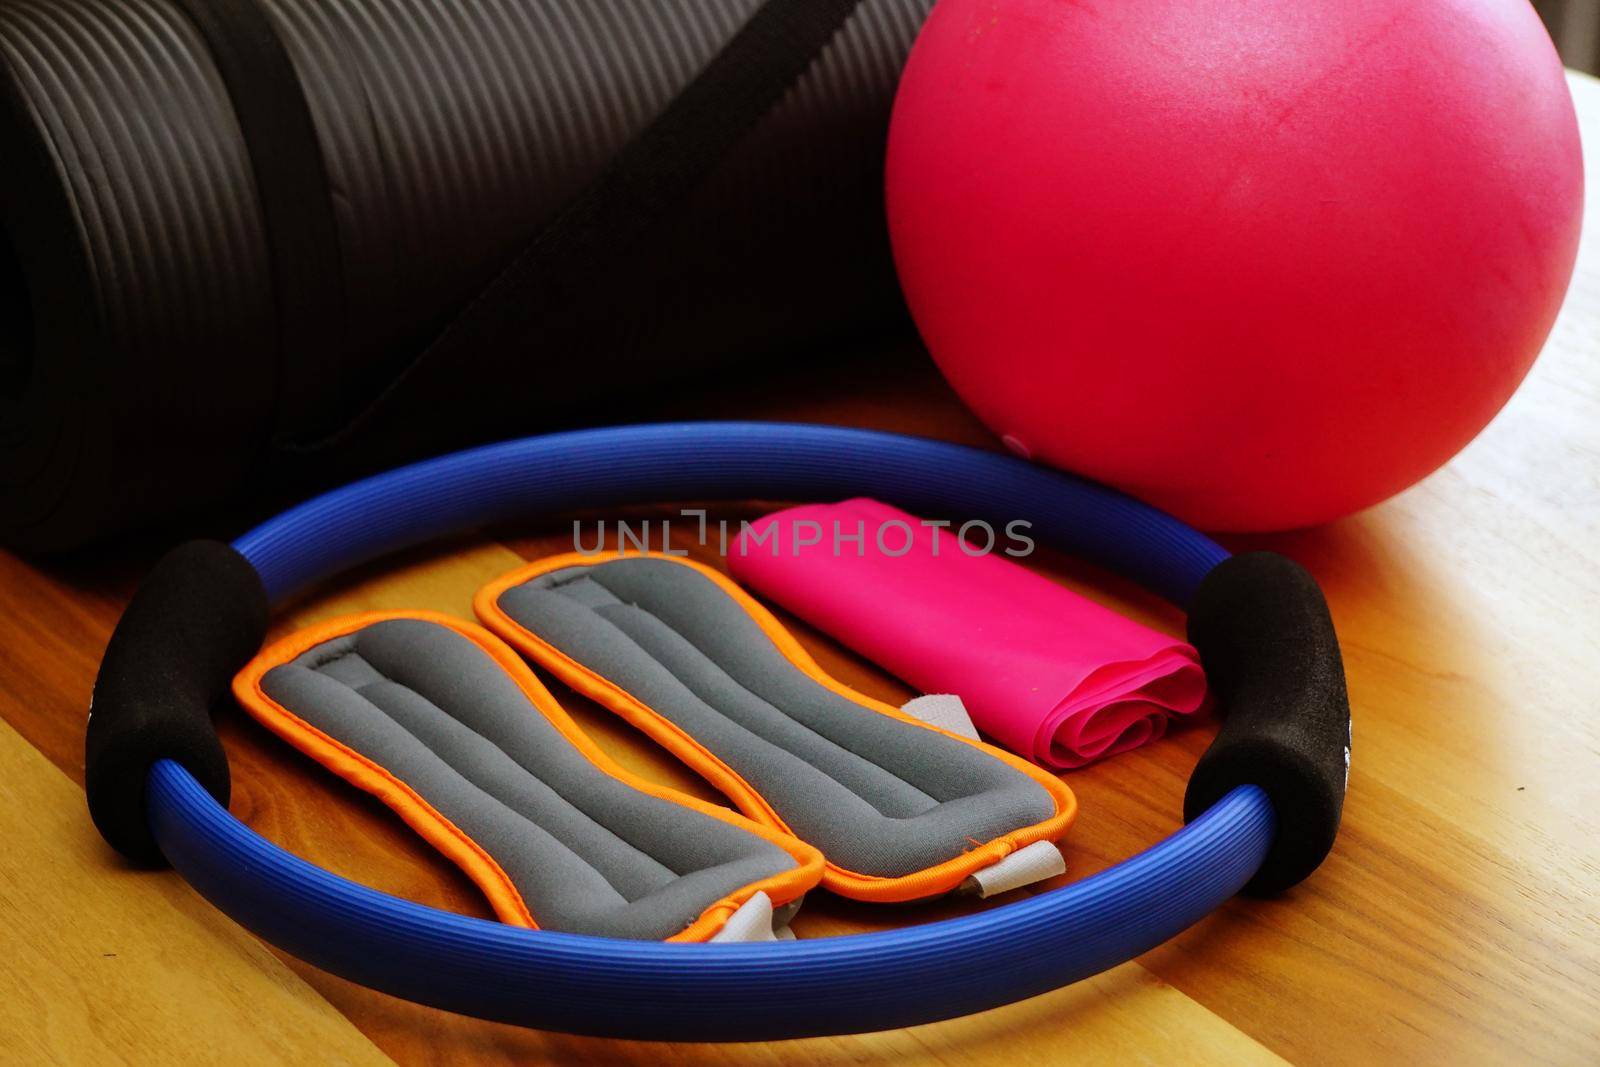 Pilates set with mat stretch ball on wooden background